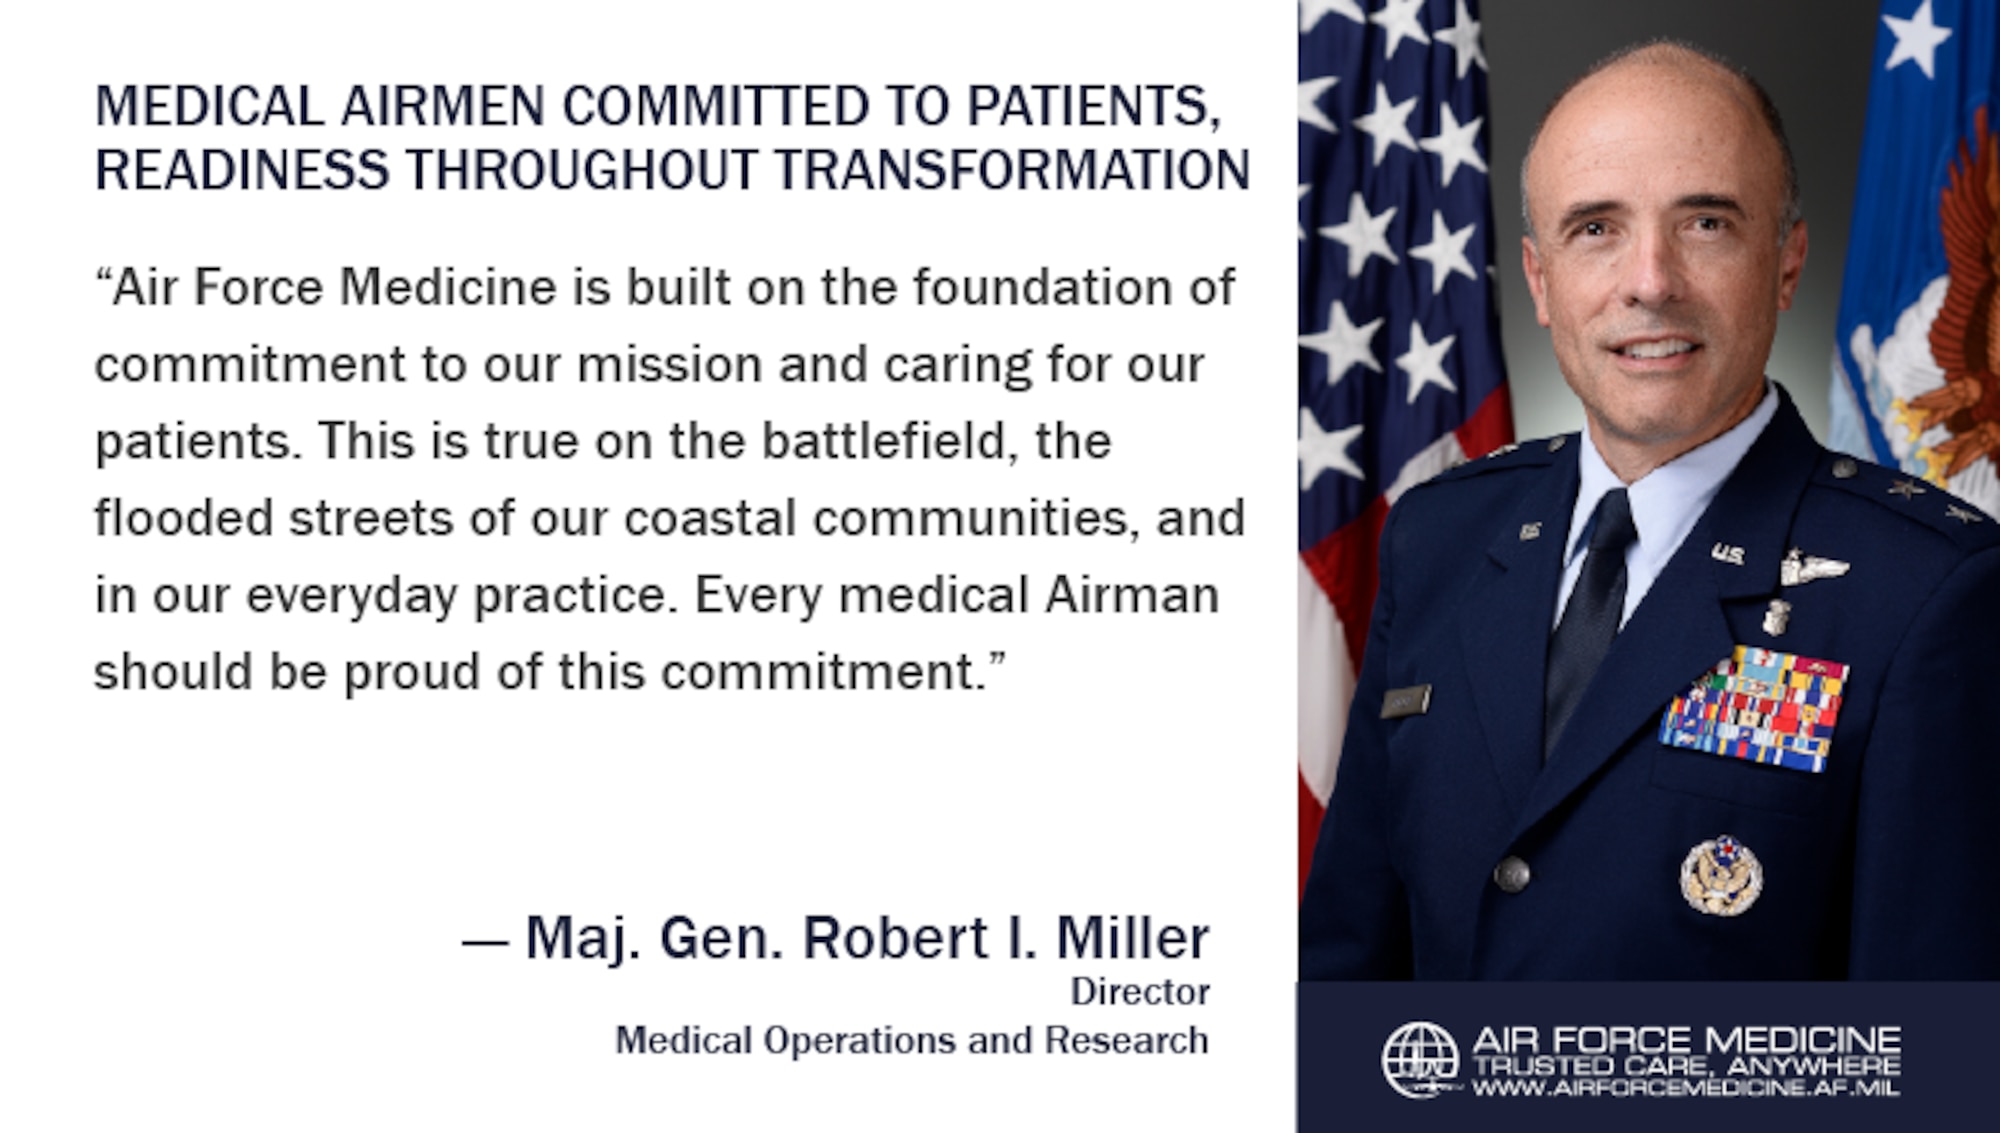 Maj. Gen. Robert I. Miller, Director, Medical Operations and Research, discusses the Air Force Medical Service transformation and how medical Airmen are maintaining an unwavering commitment to readiness and Trusted Care. (U.S. Air Force illustration)